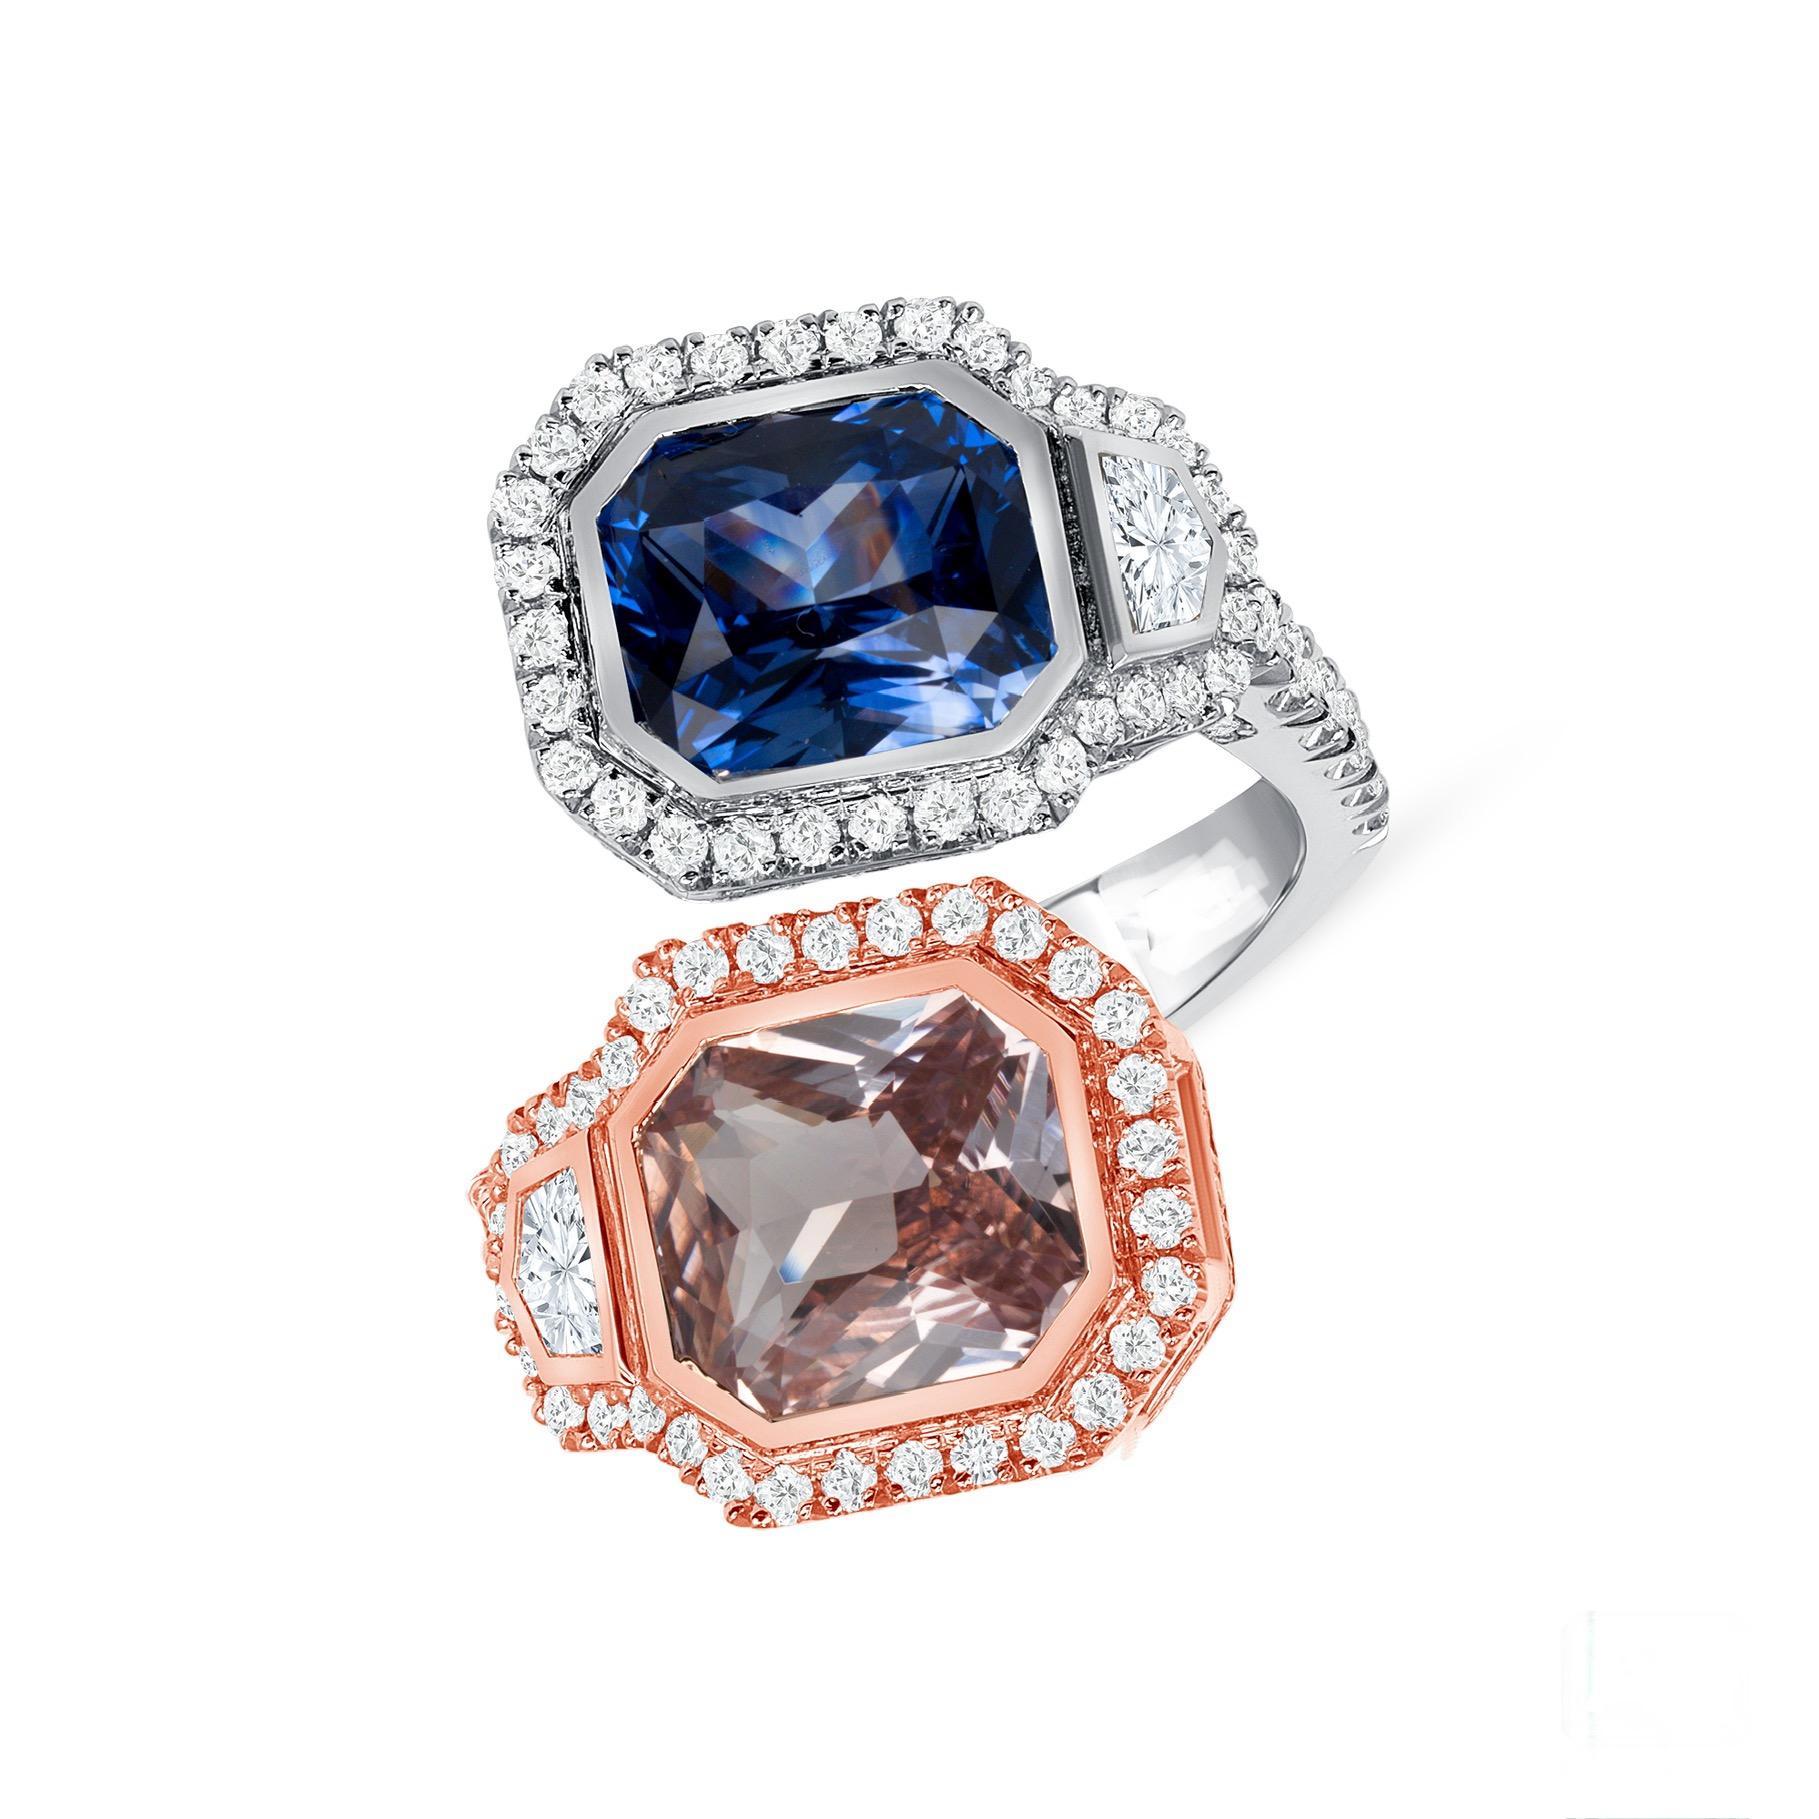 This bypass sapphire ring is balanced in such a way as to be very comfortable on the hand, and versatile enough to be an engagement or anniversary piece. Featuring stunning Ceylon sapphires of exceptional color and clarity - a 3.05ct Pink Sapphire